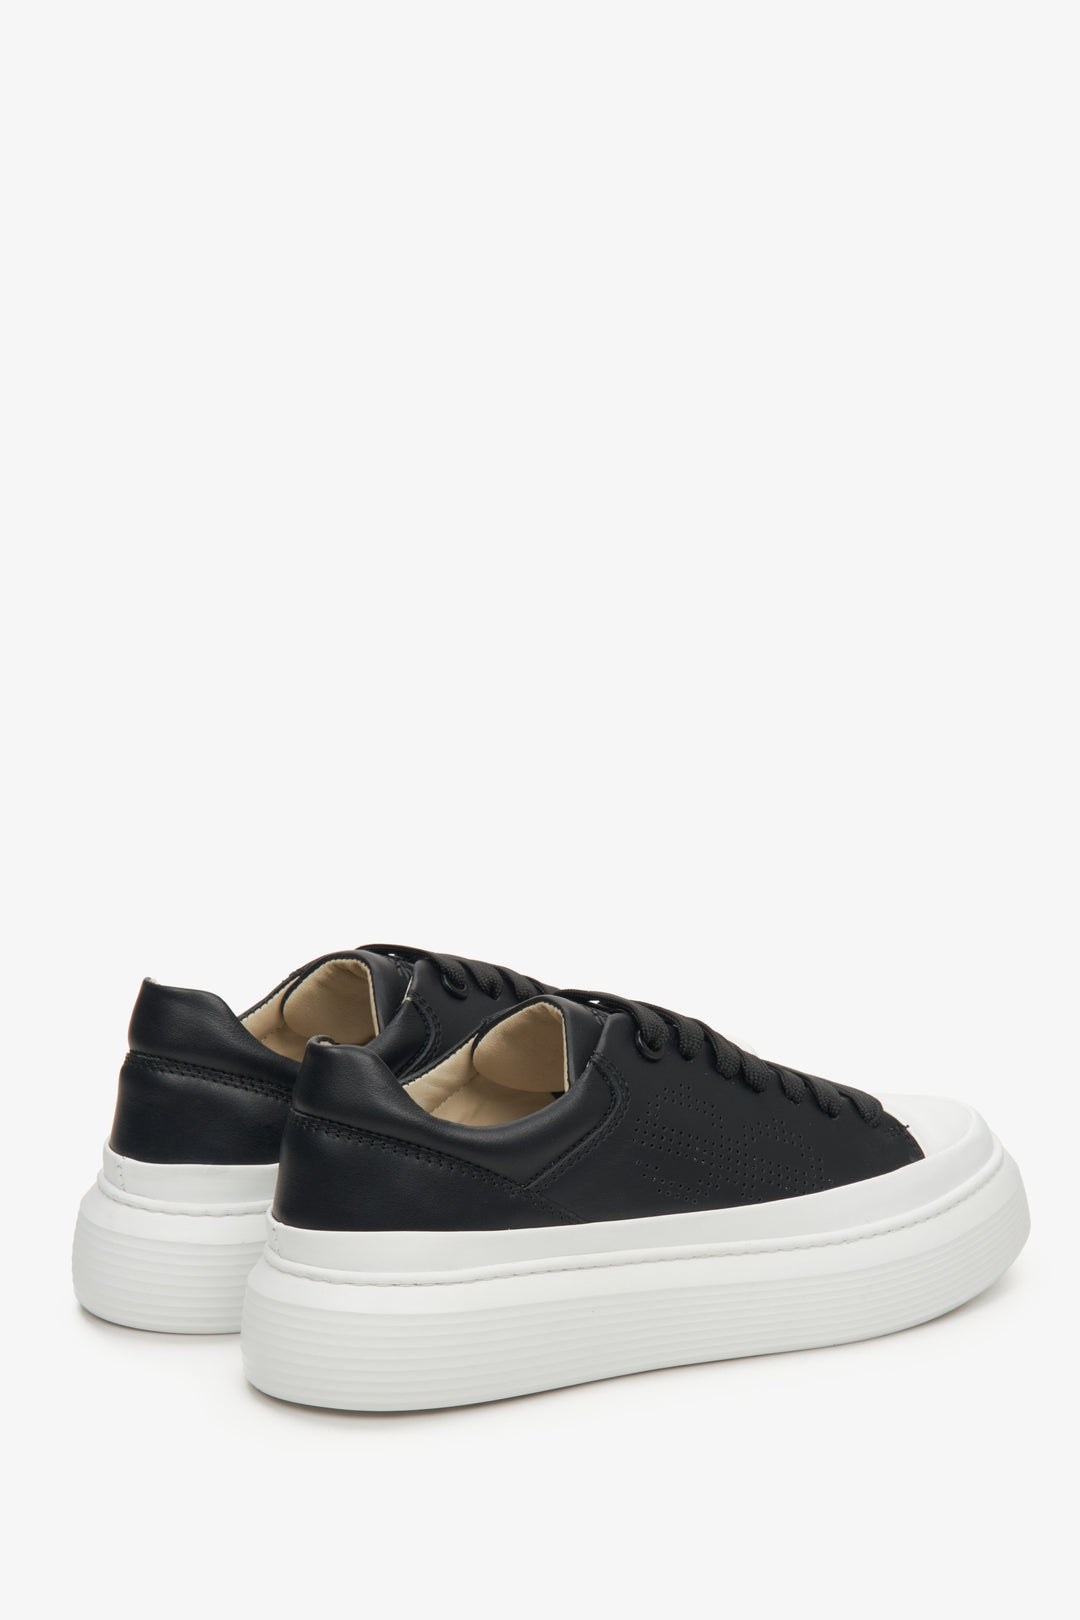 Women's black Estro natural leather sneakers for spring - close-up of the heel counter and sideline.